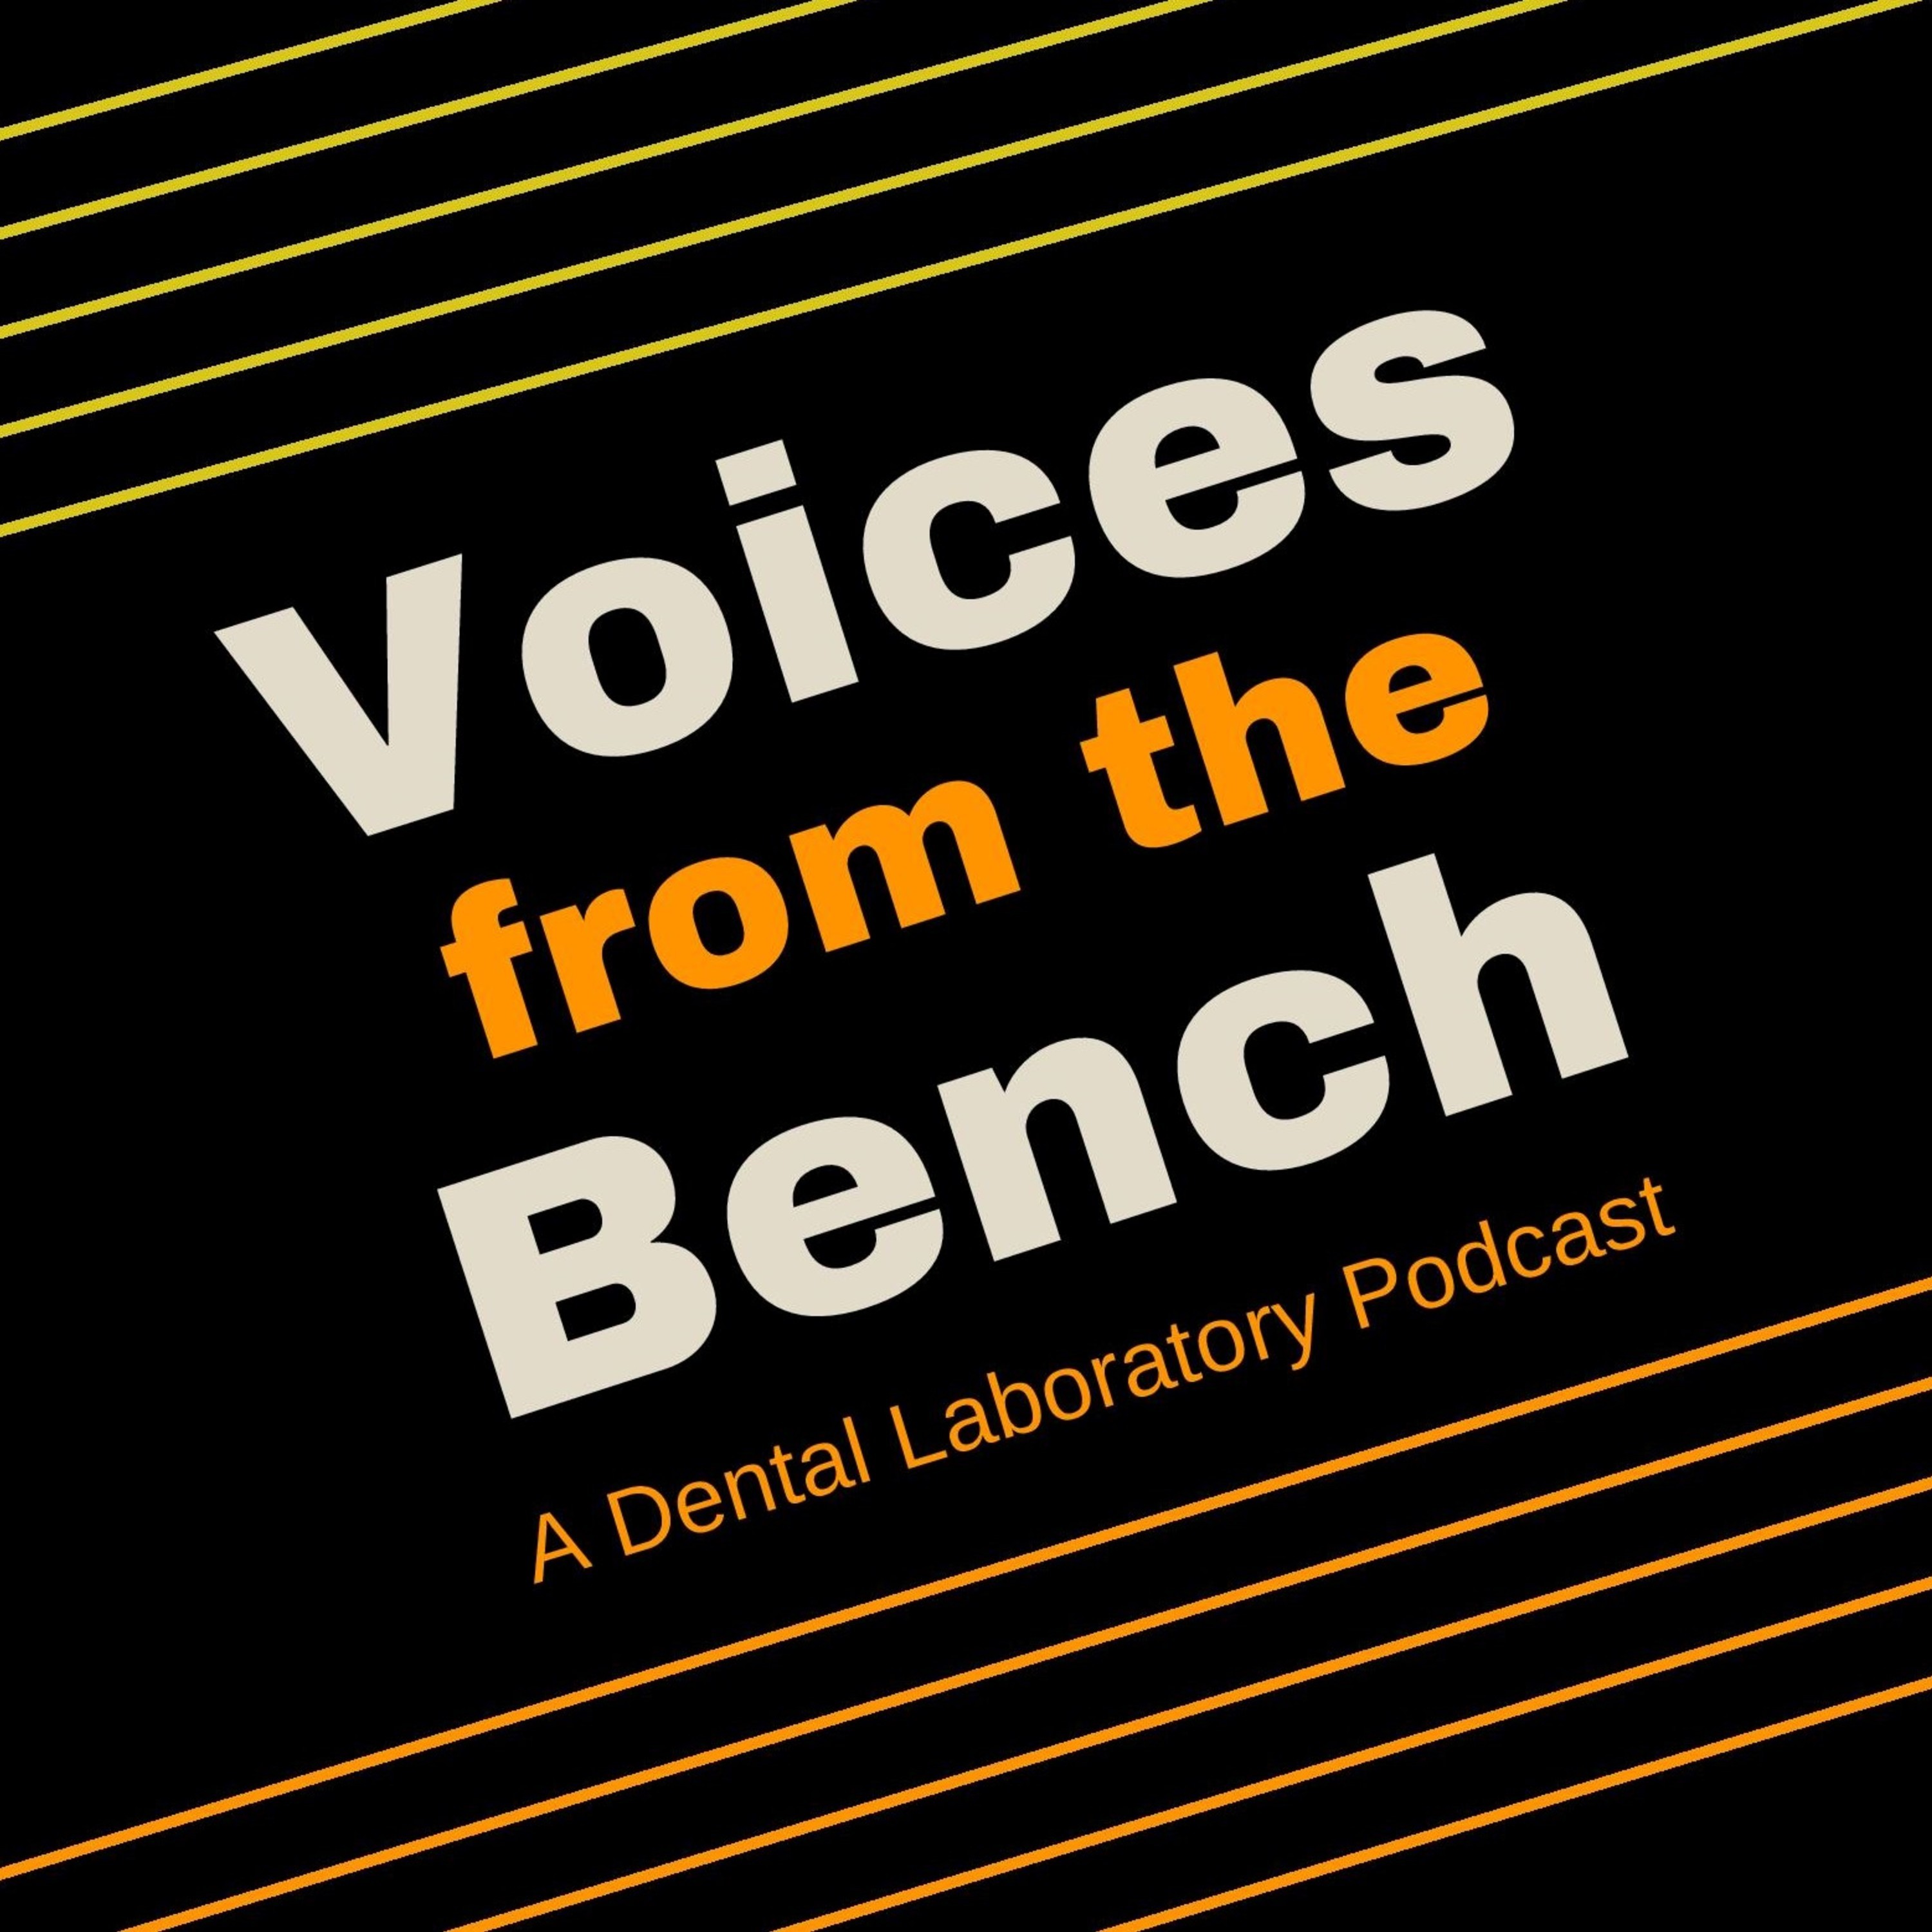 Episode 25: Breathe Easy: A Chat About the Air Quality in Dental Laboratories Part 1 (VFTB25)